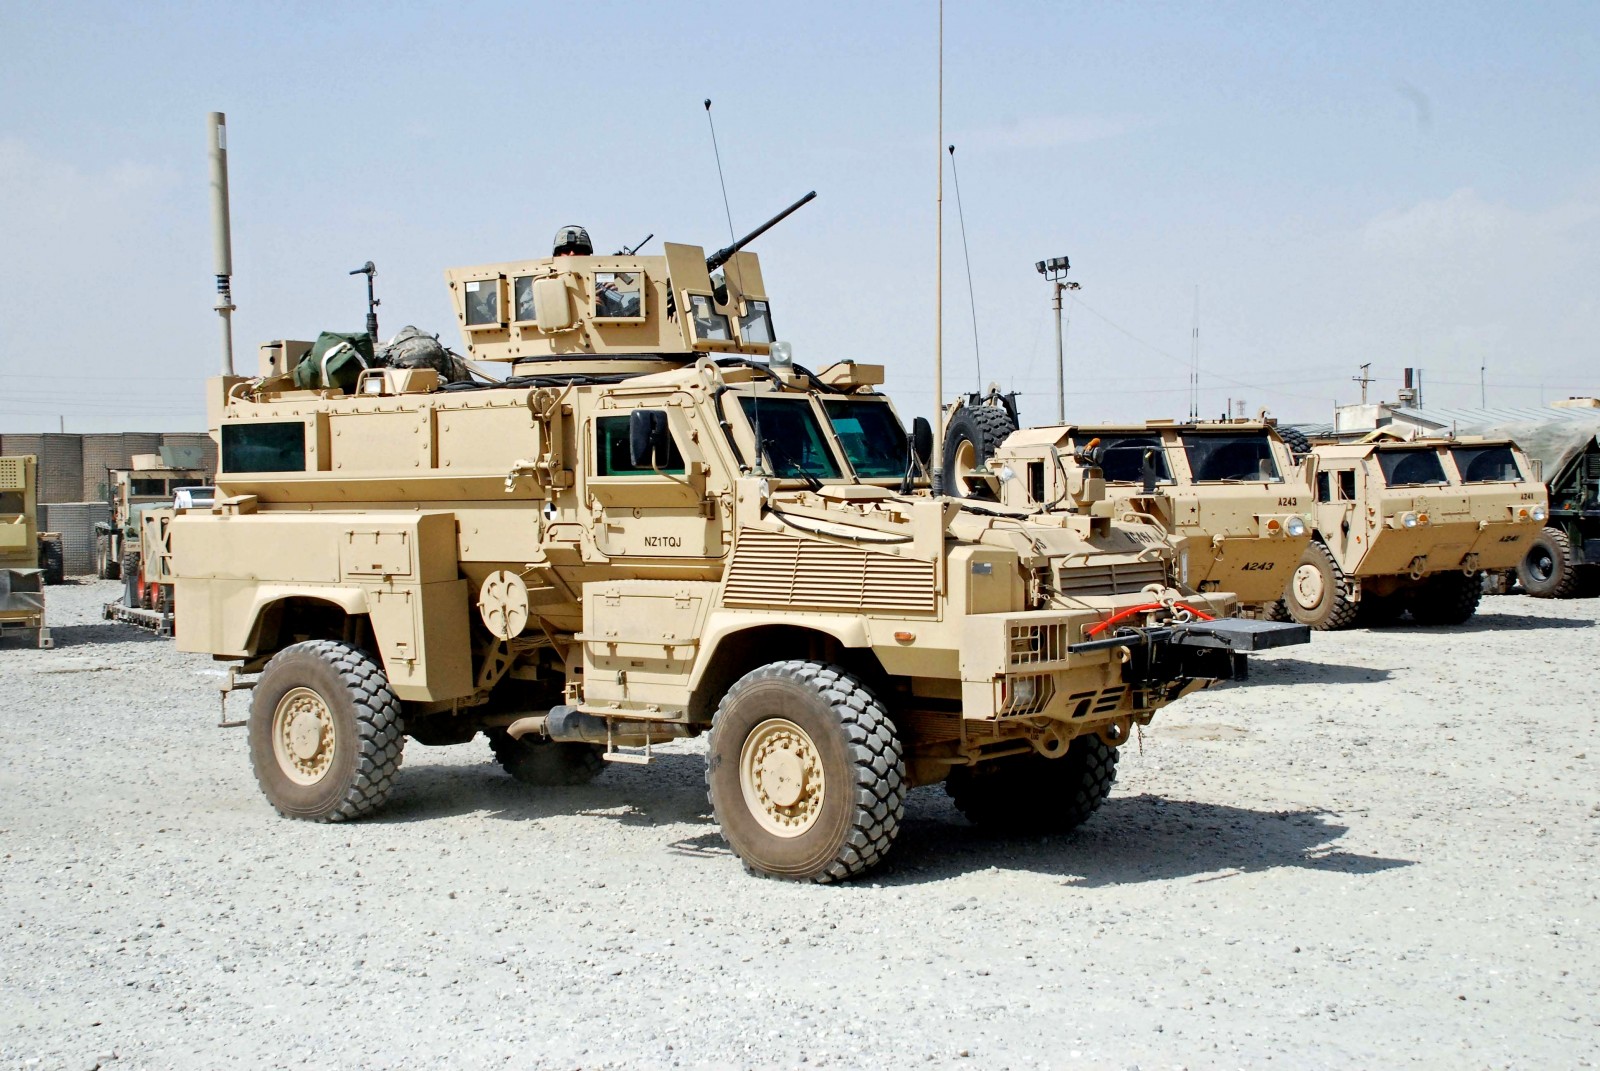 Why Are Mine-Resistant Ambush Protected (MRAP) Vehicles Active in Texas